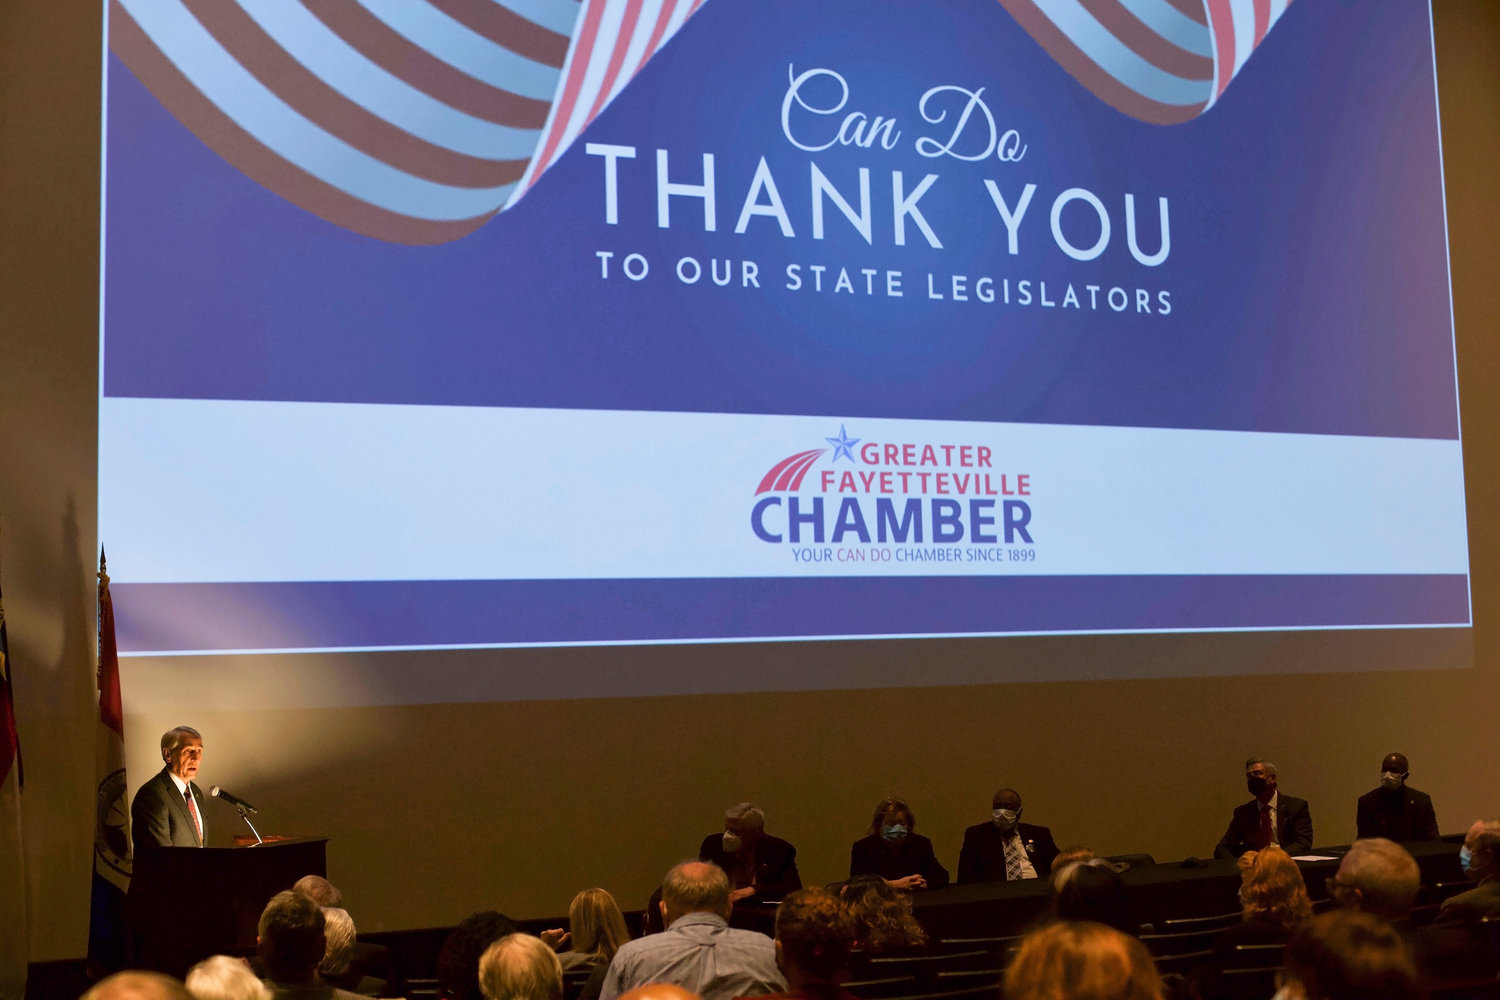 N.C. Rep. John Szoka talks to The Greater Fayetteville Chamber on Thursday during its 'Can Do, Thank You' reception for Cumberland County's legislative delegation.